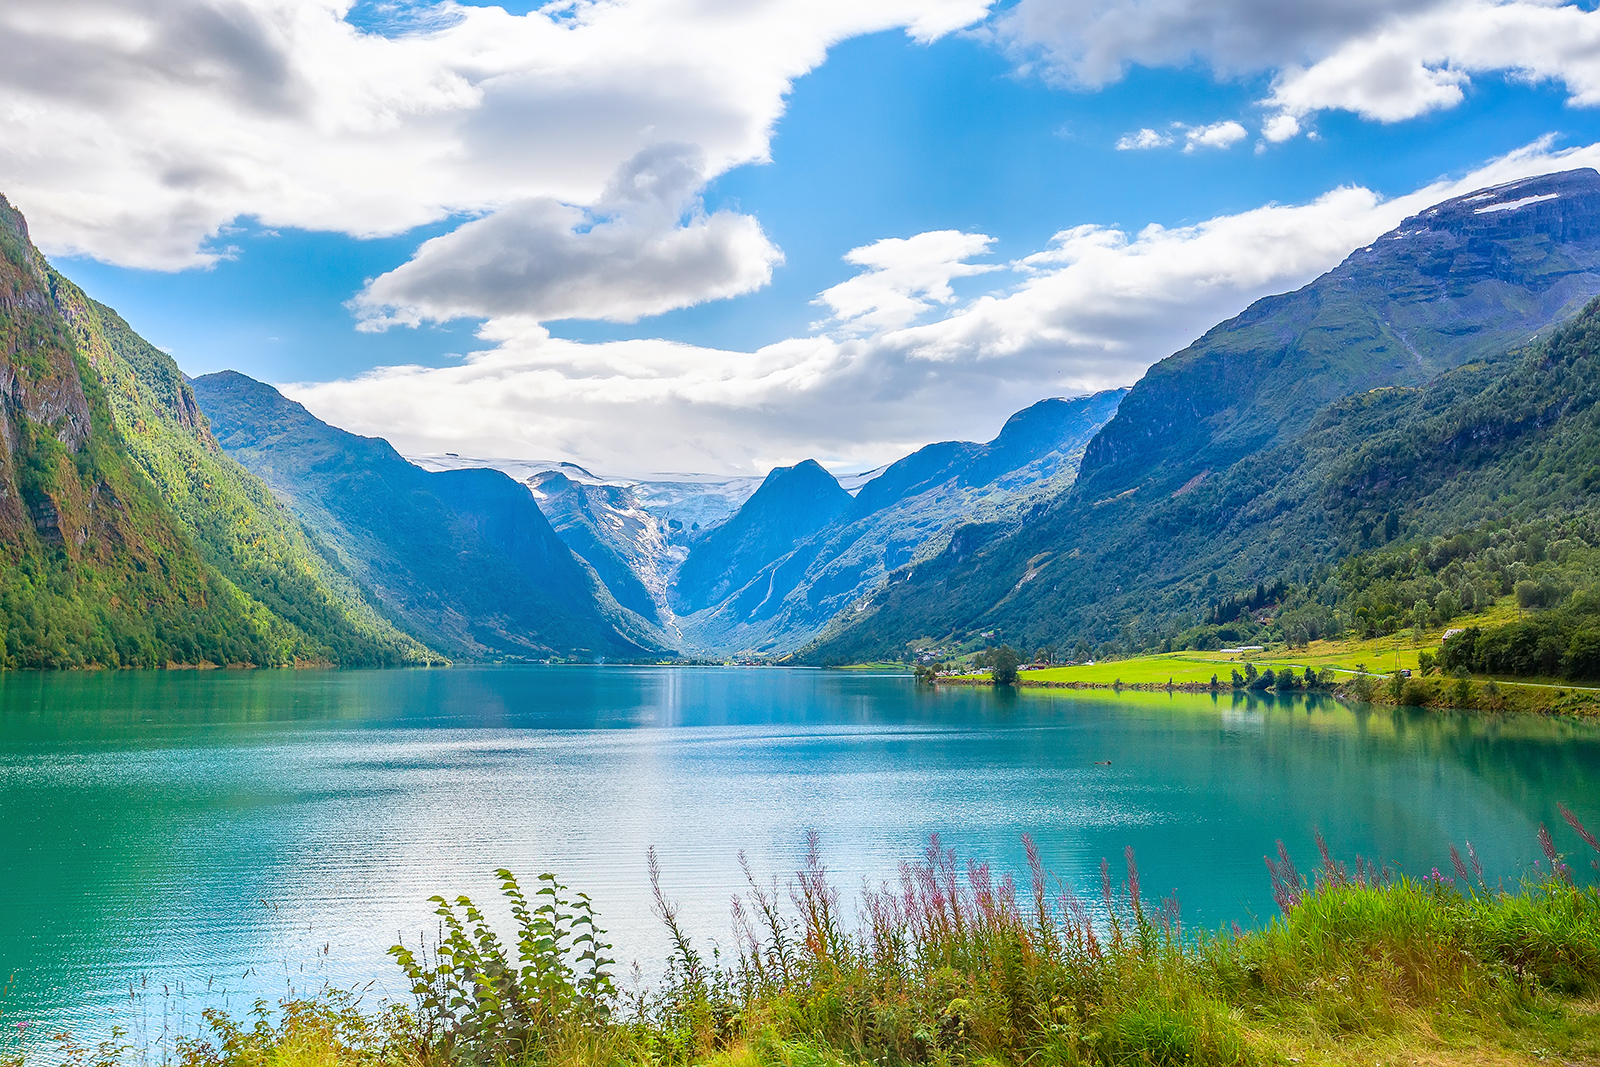 Explore the natural beauty of Norway, home to the majestic fjords, on a cruise